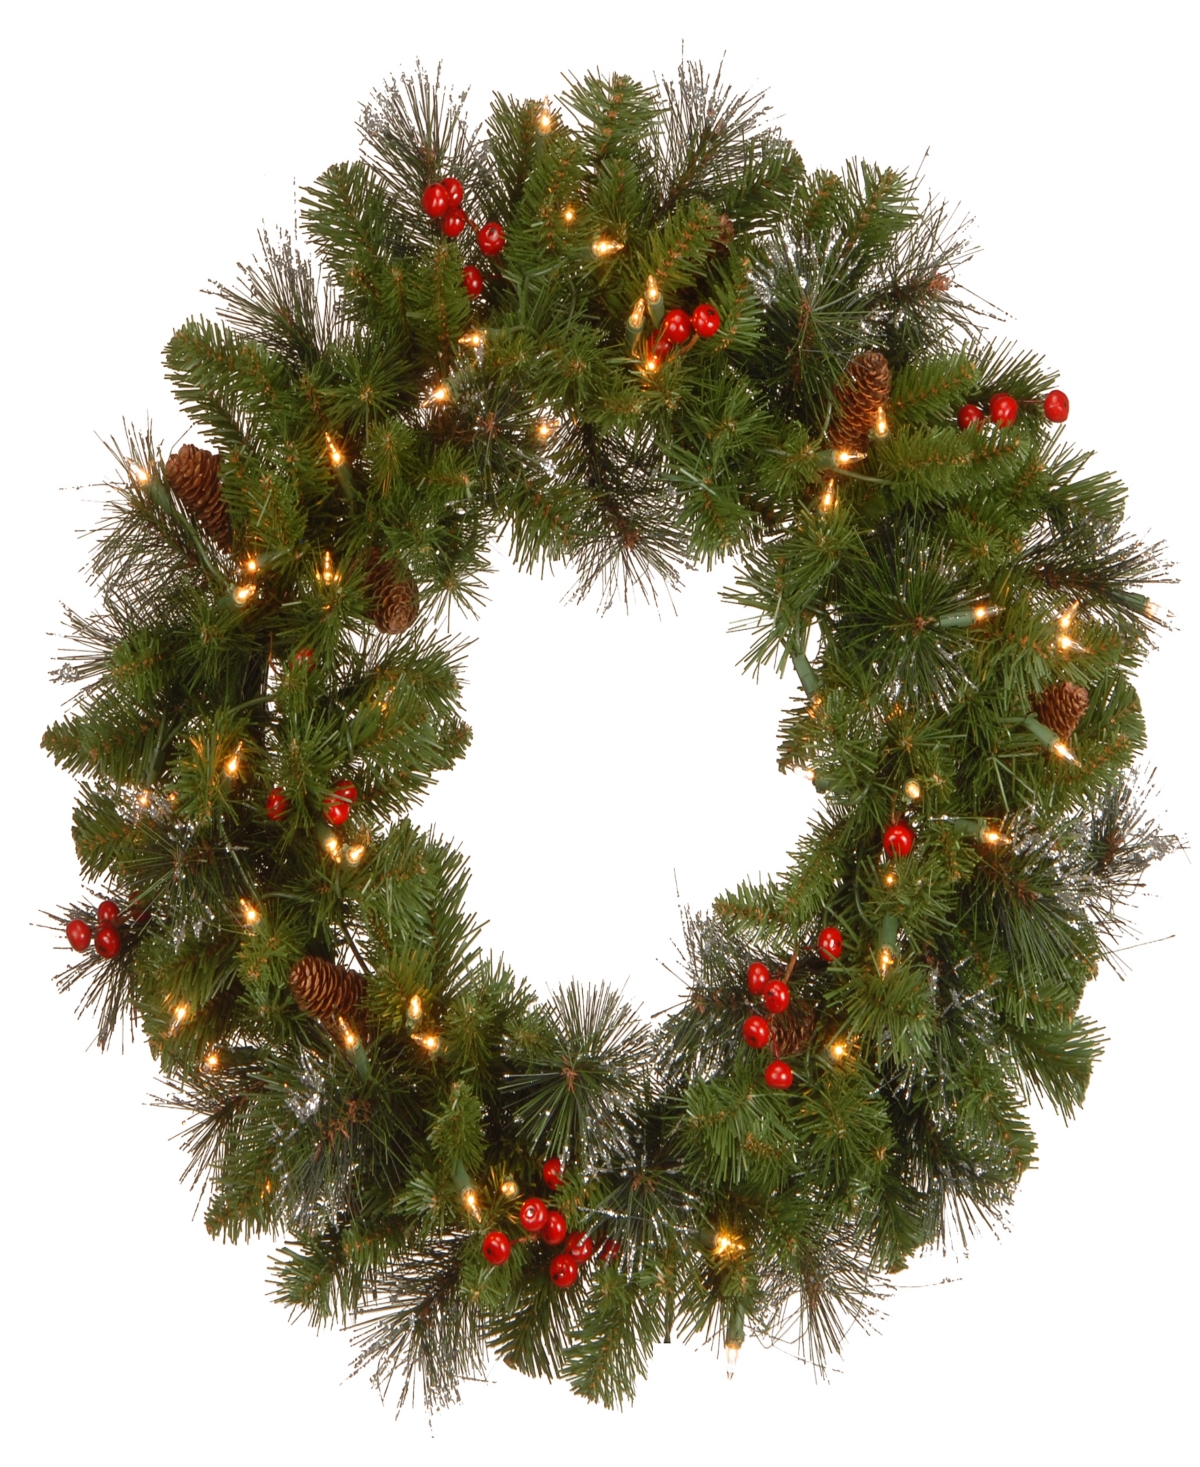 24" Crestwood Spruce Wreath with Twinkly Led Lights - Green